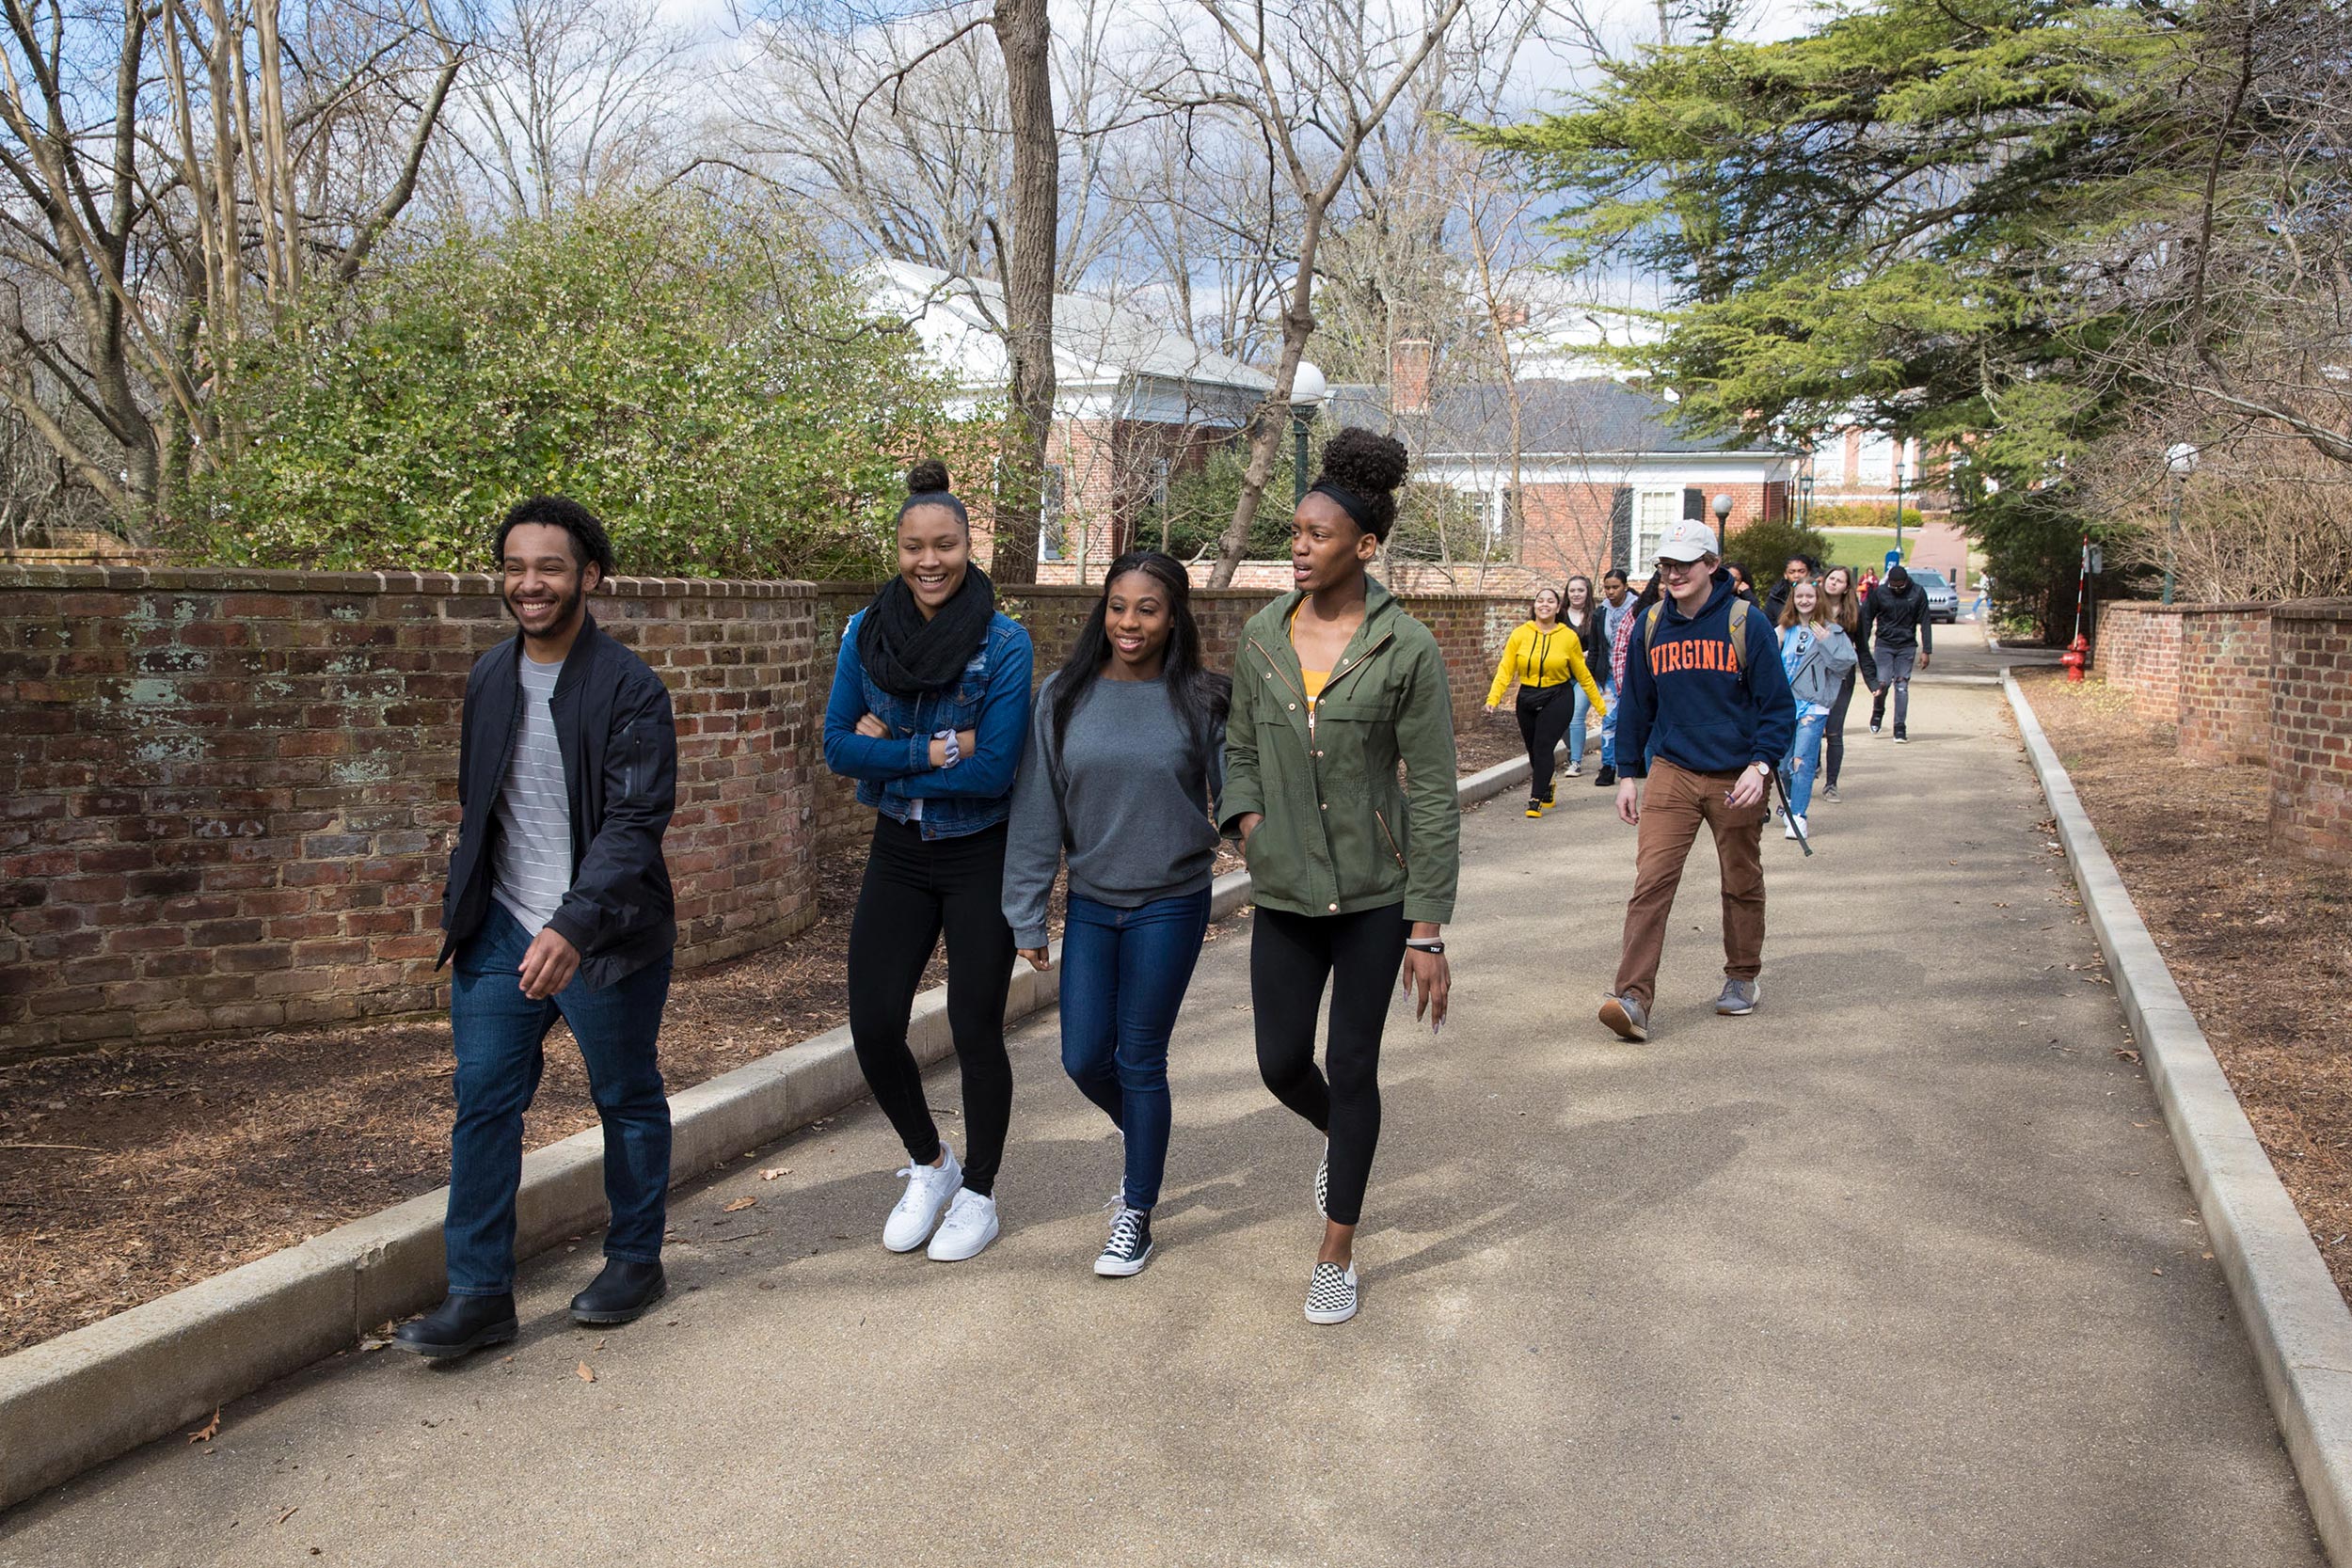 Students walking between the serpentine walls near the lawn